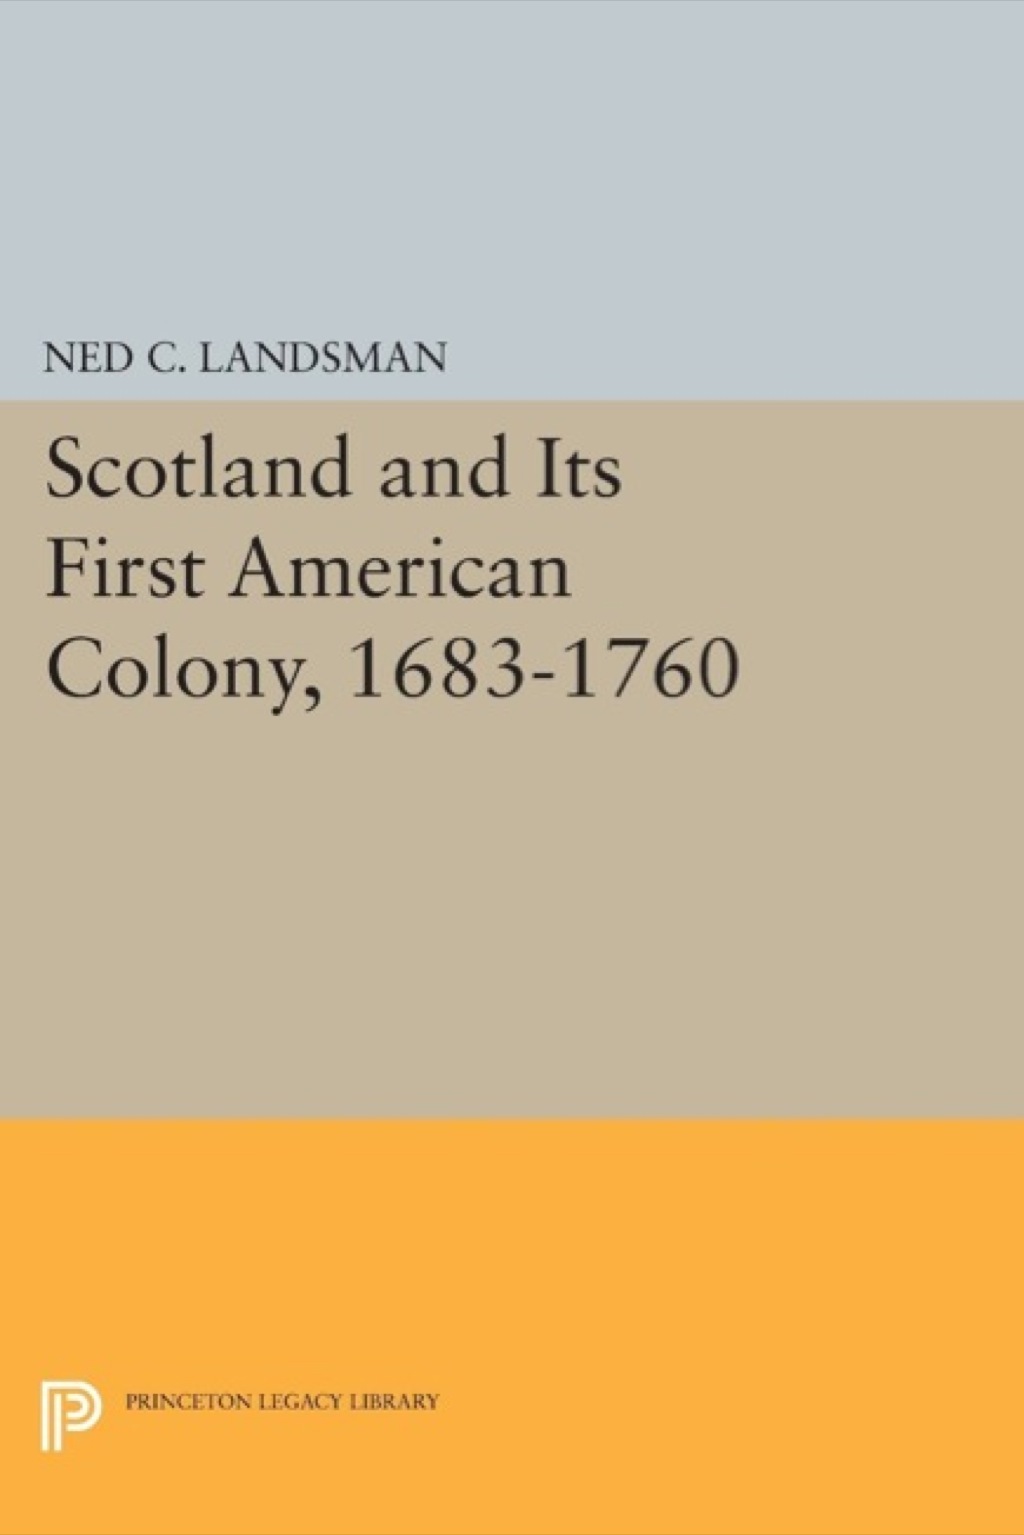 Scotland and Its First American Colony  1683-1765 (eBook) - Ned C. Landsman,